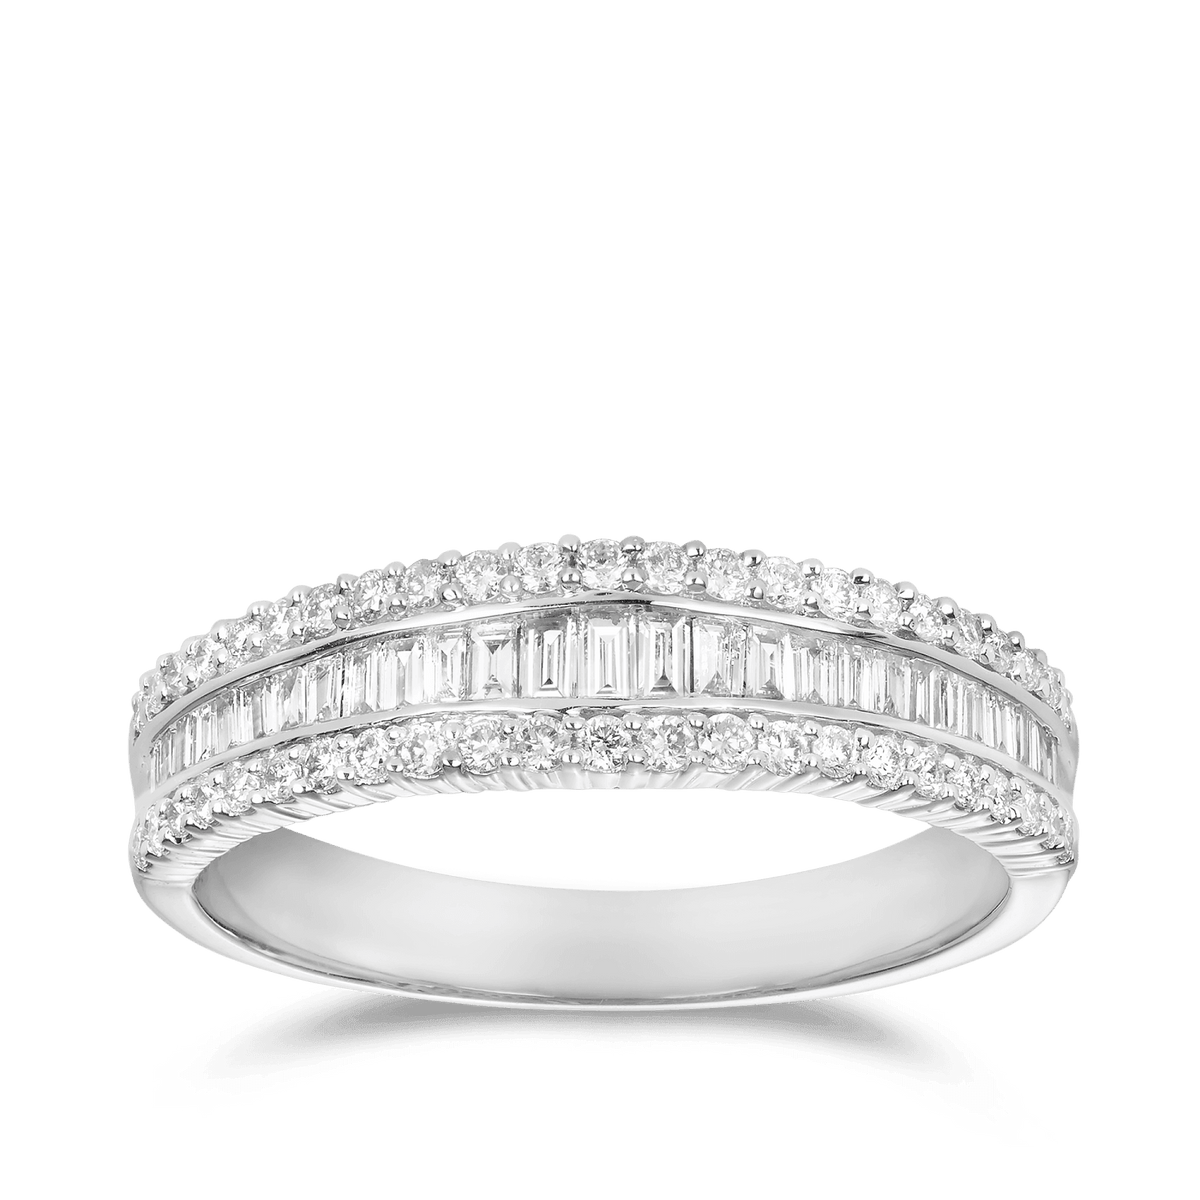 0.50ct TW Diamond Ring in 9ct White Gold - Wallace Bishop